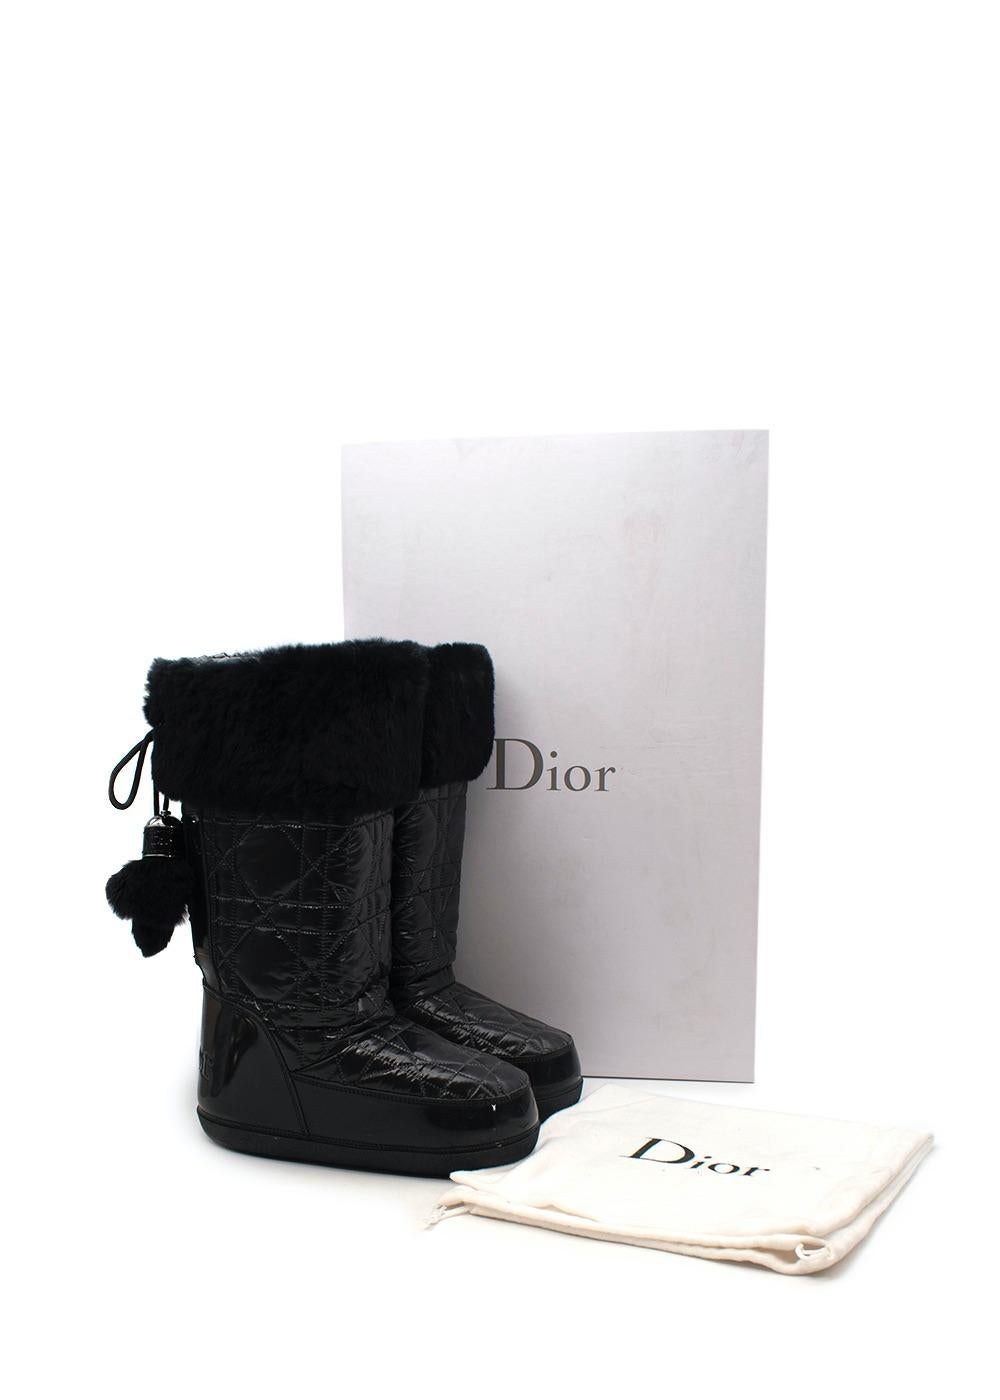 Dior Black Cannage Nylon Fur Trimmed Snow Boots

- Calf length boots panelled with cannage quilted nylon body, and patent leather and rabbit fur trims
- Back lace up closure 
- Embossed logo at heel 
- Ridged rubber sole
- Silver-tone hardware